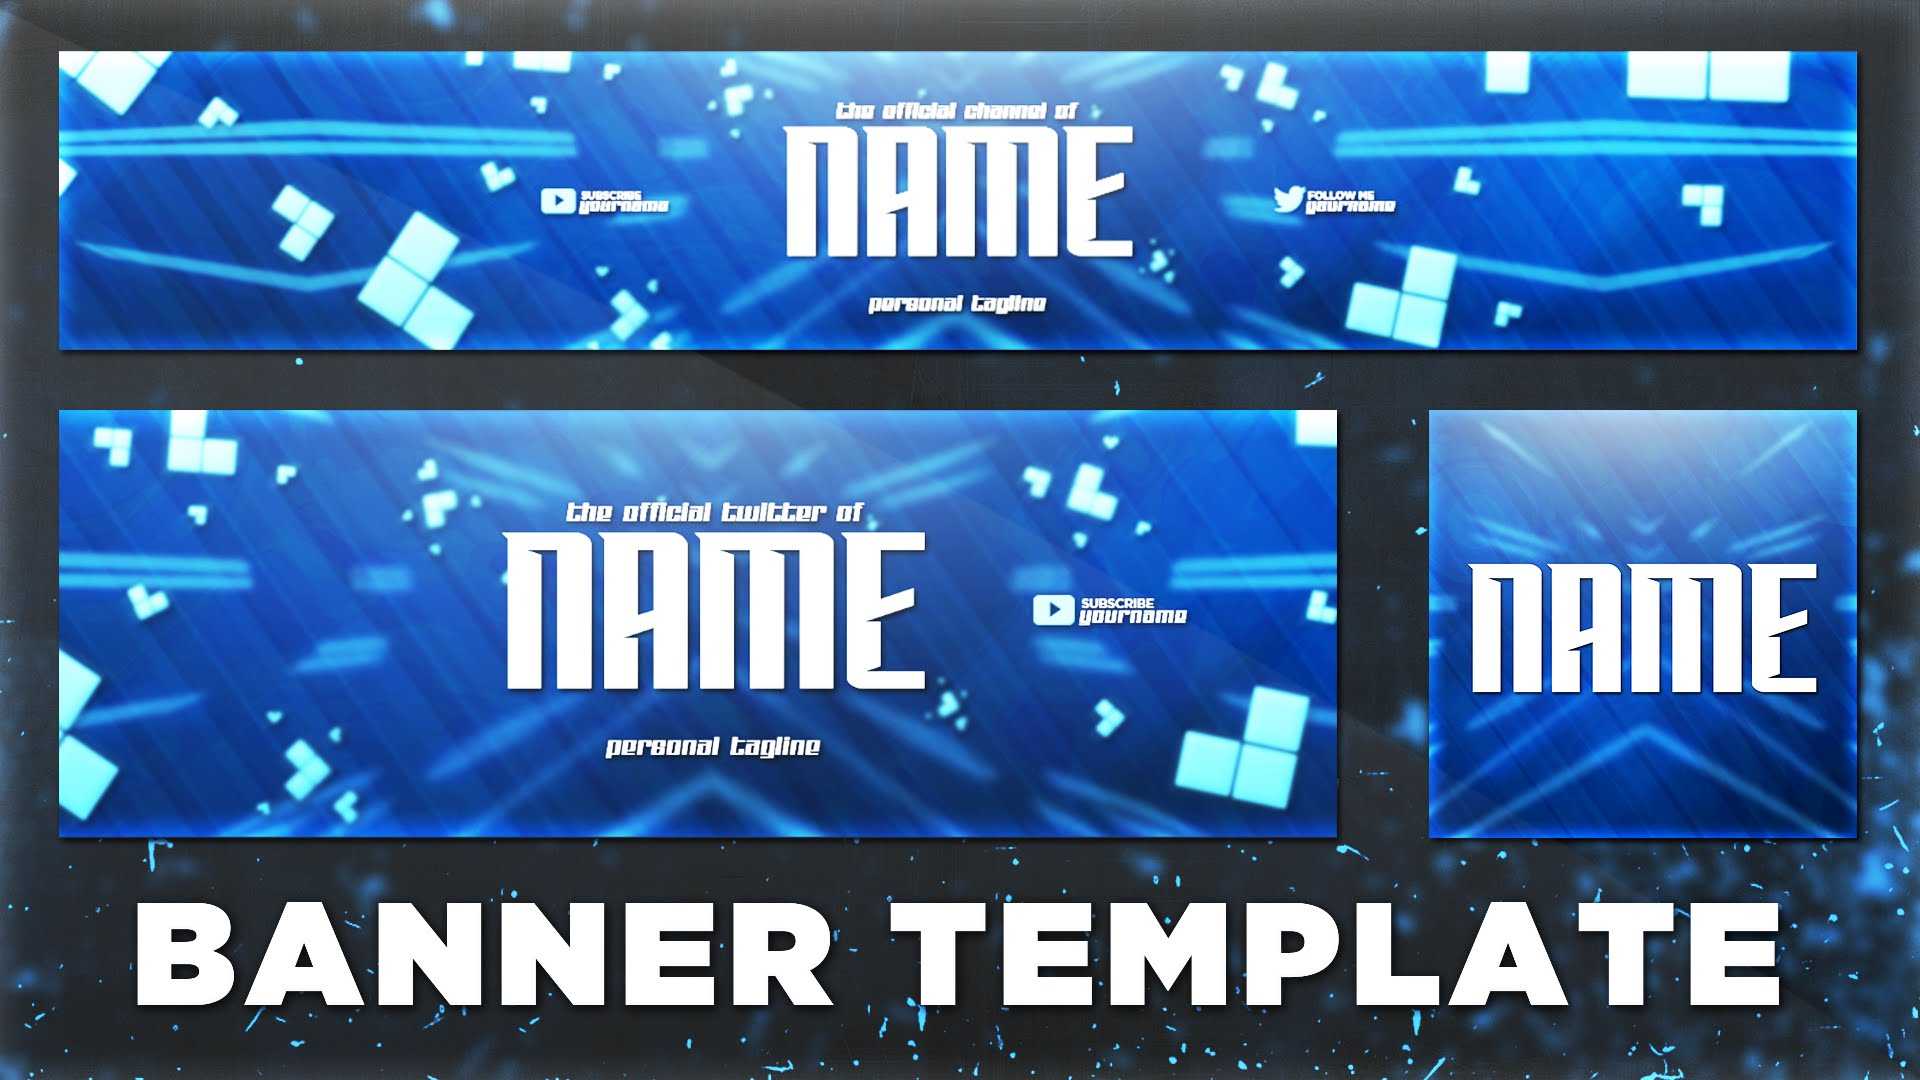 Sick Youtube Banner Template Psd (Photoshop Cc + Cs6) | Free Inside Banner Template For Photoshop